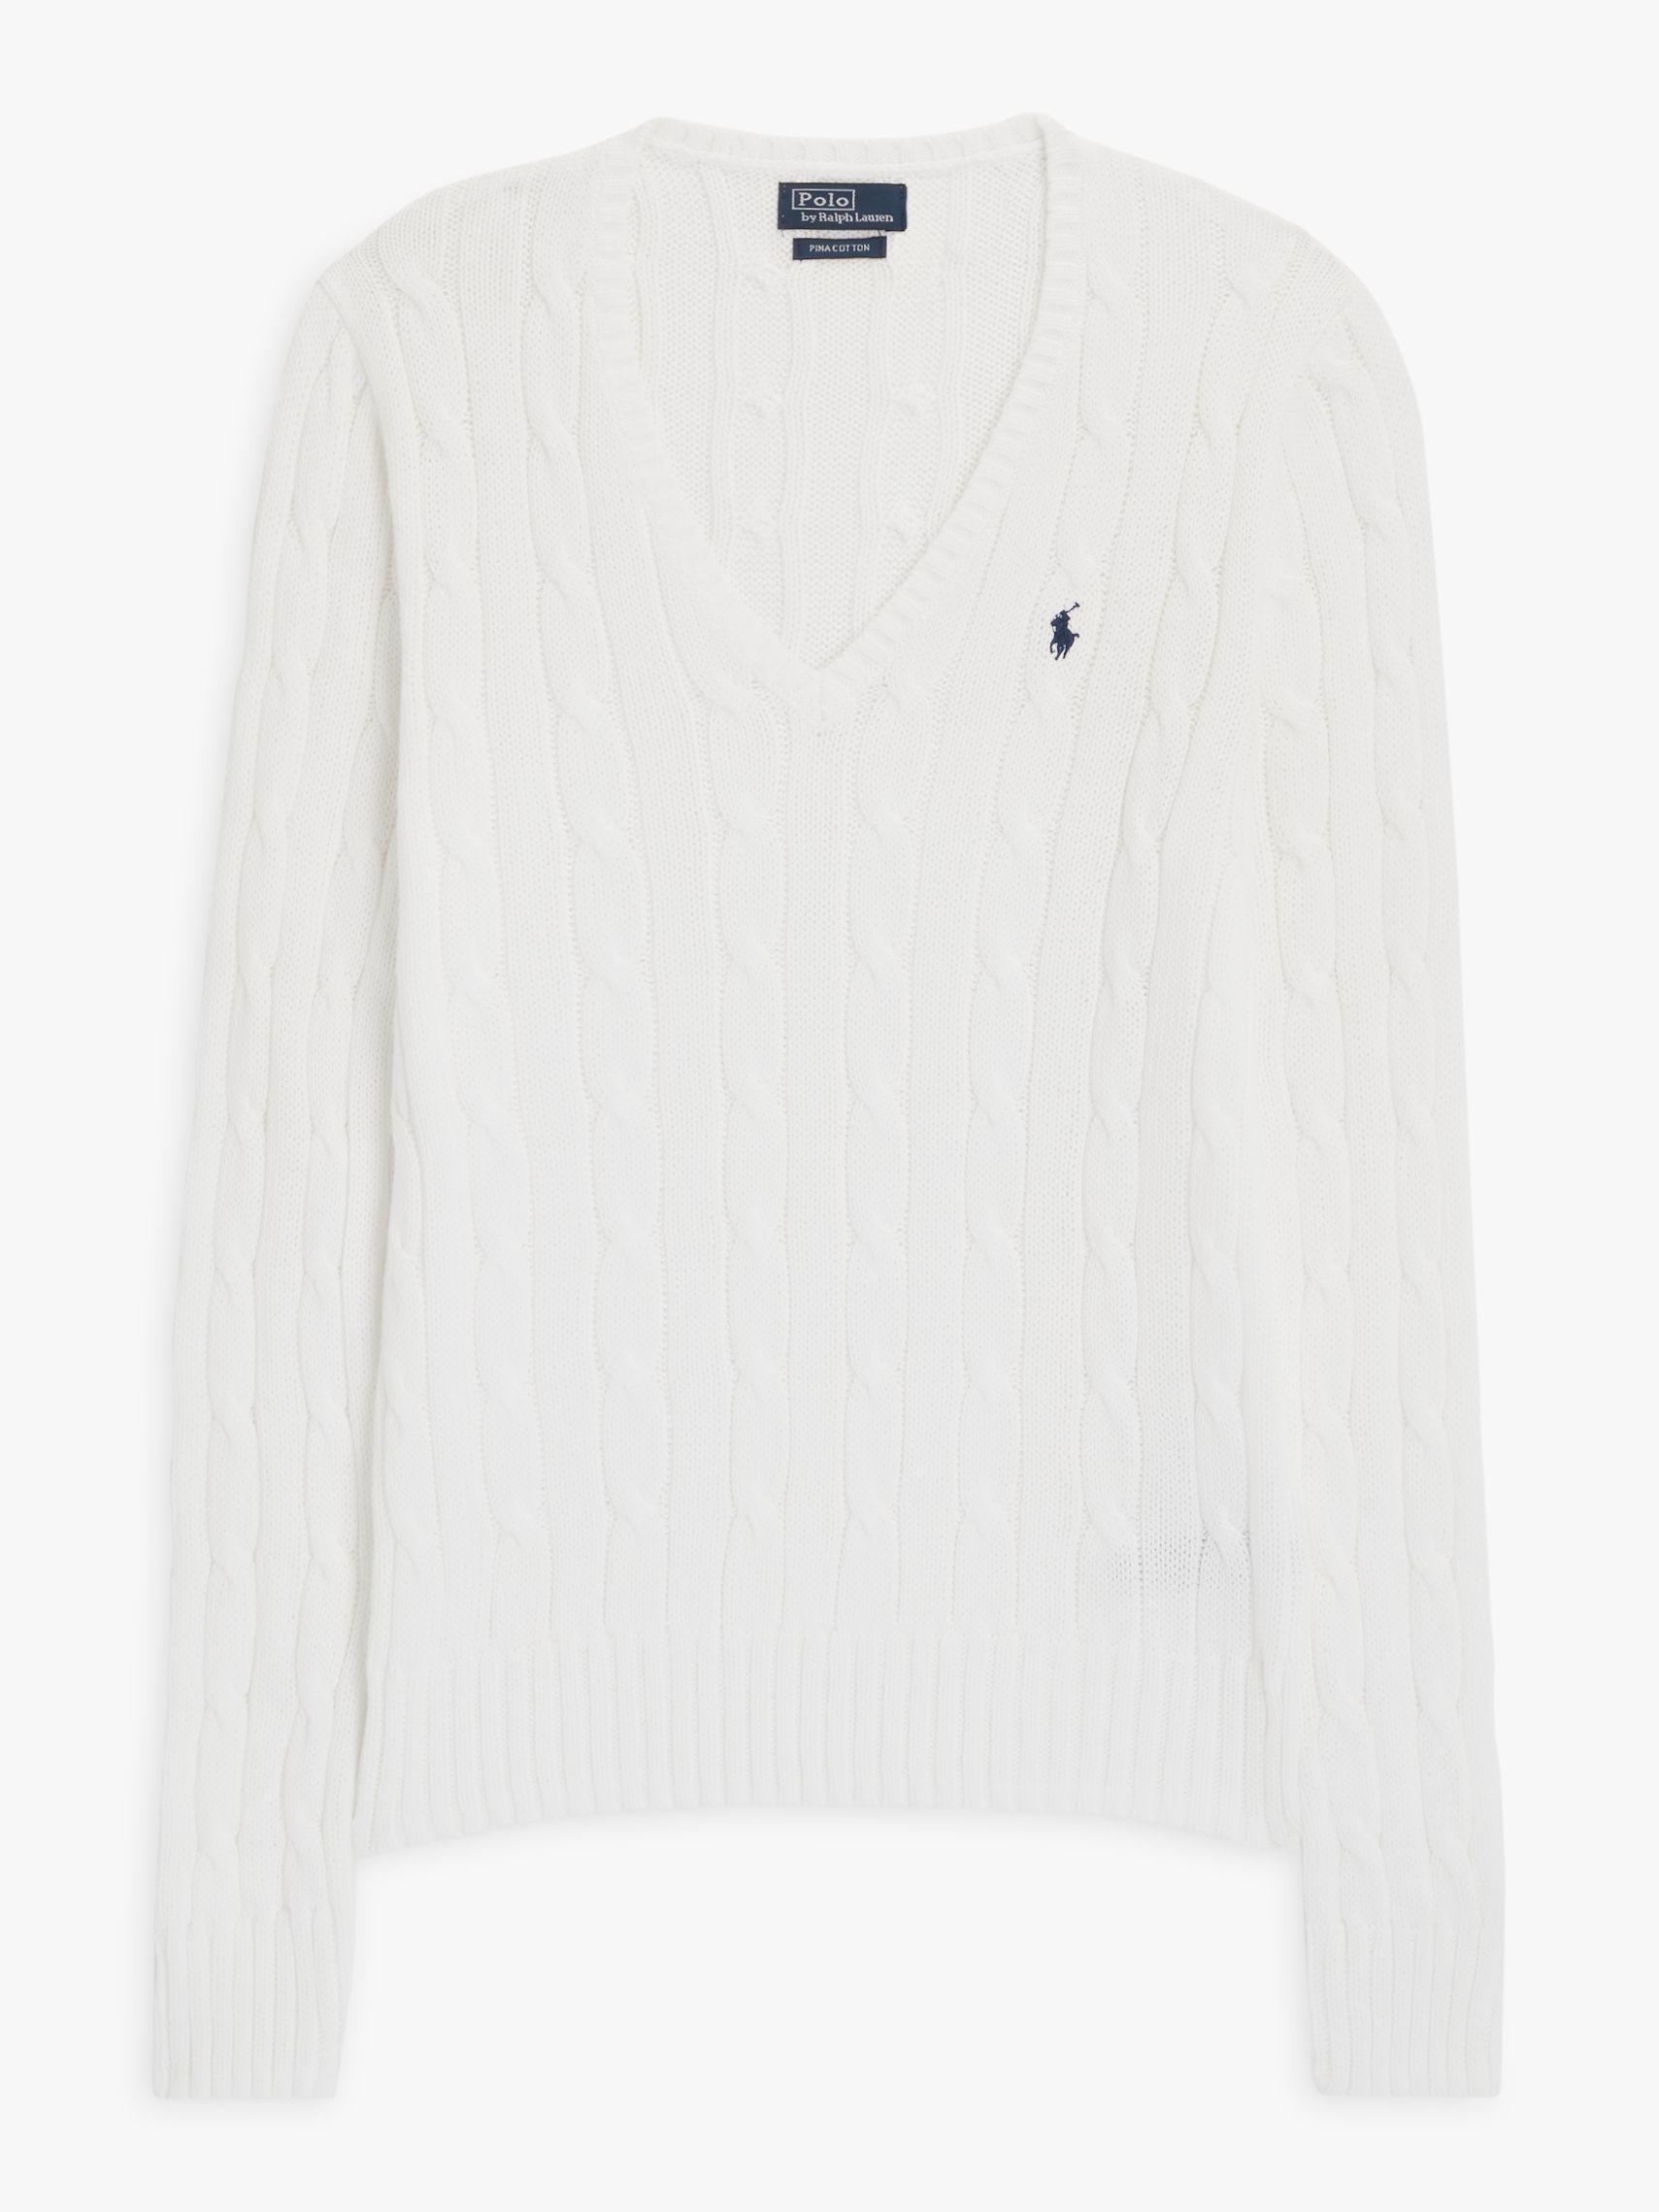 Polo Ralph Laure Kimberly V-Neck Cable Knit Jumper, White